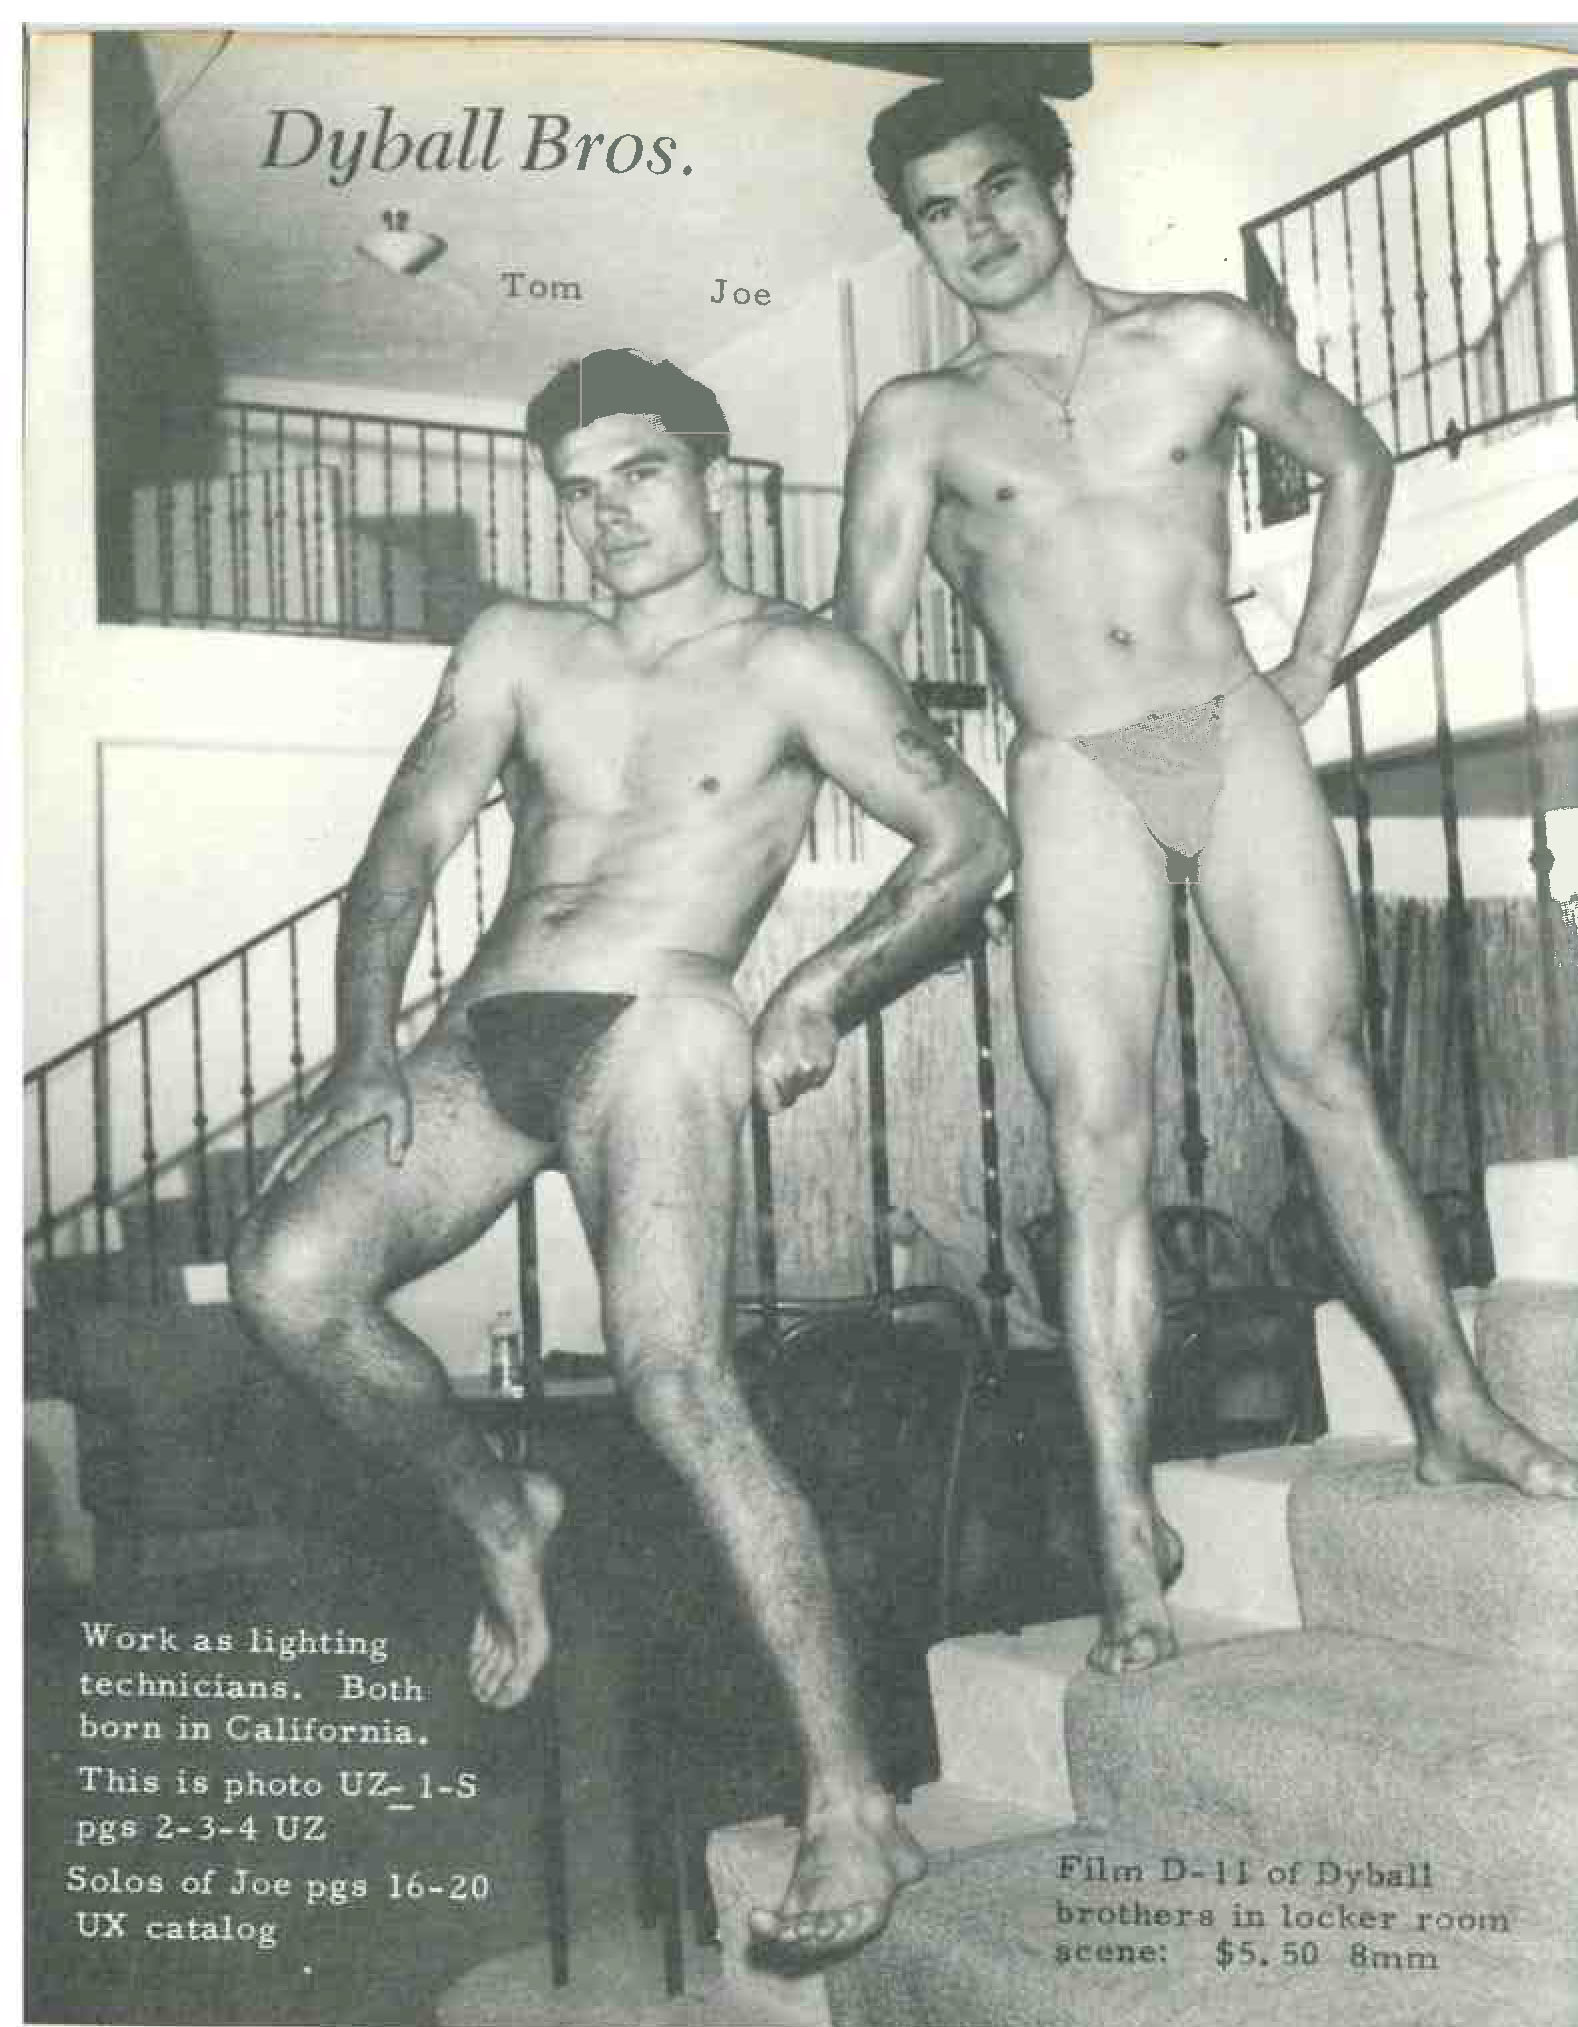 Bodybuilding brothers: 1968 Physique Pictorial issue had readers seeing double